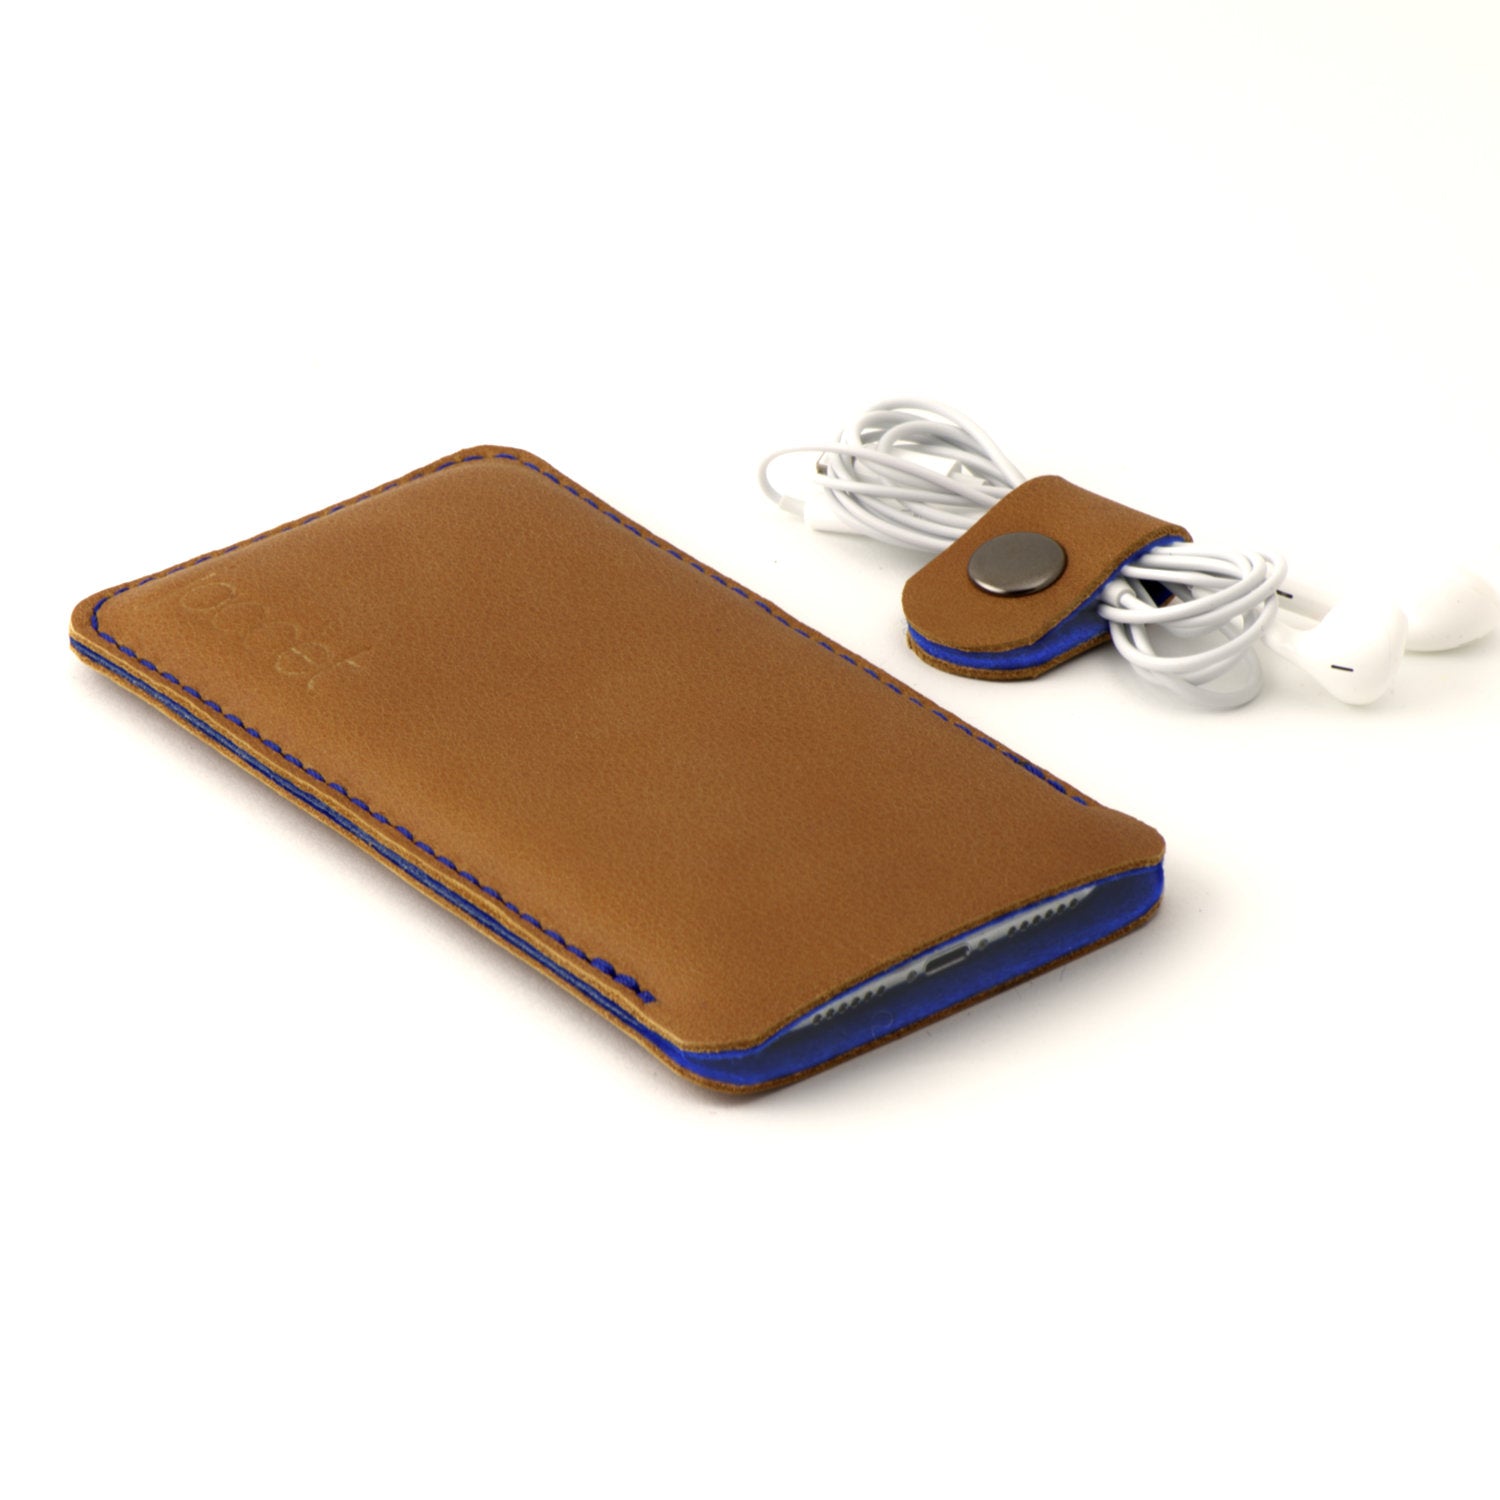 JACCET leather Xiaomi sleeve - Cognac color leather with blue wool felt - 100% Handmade